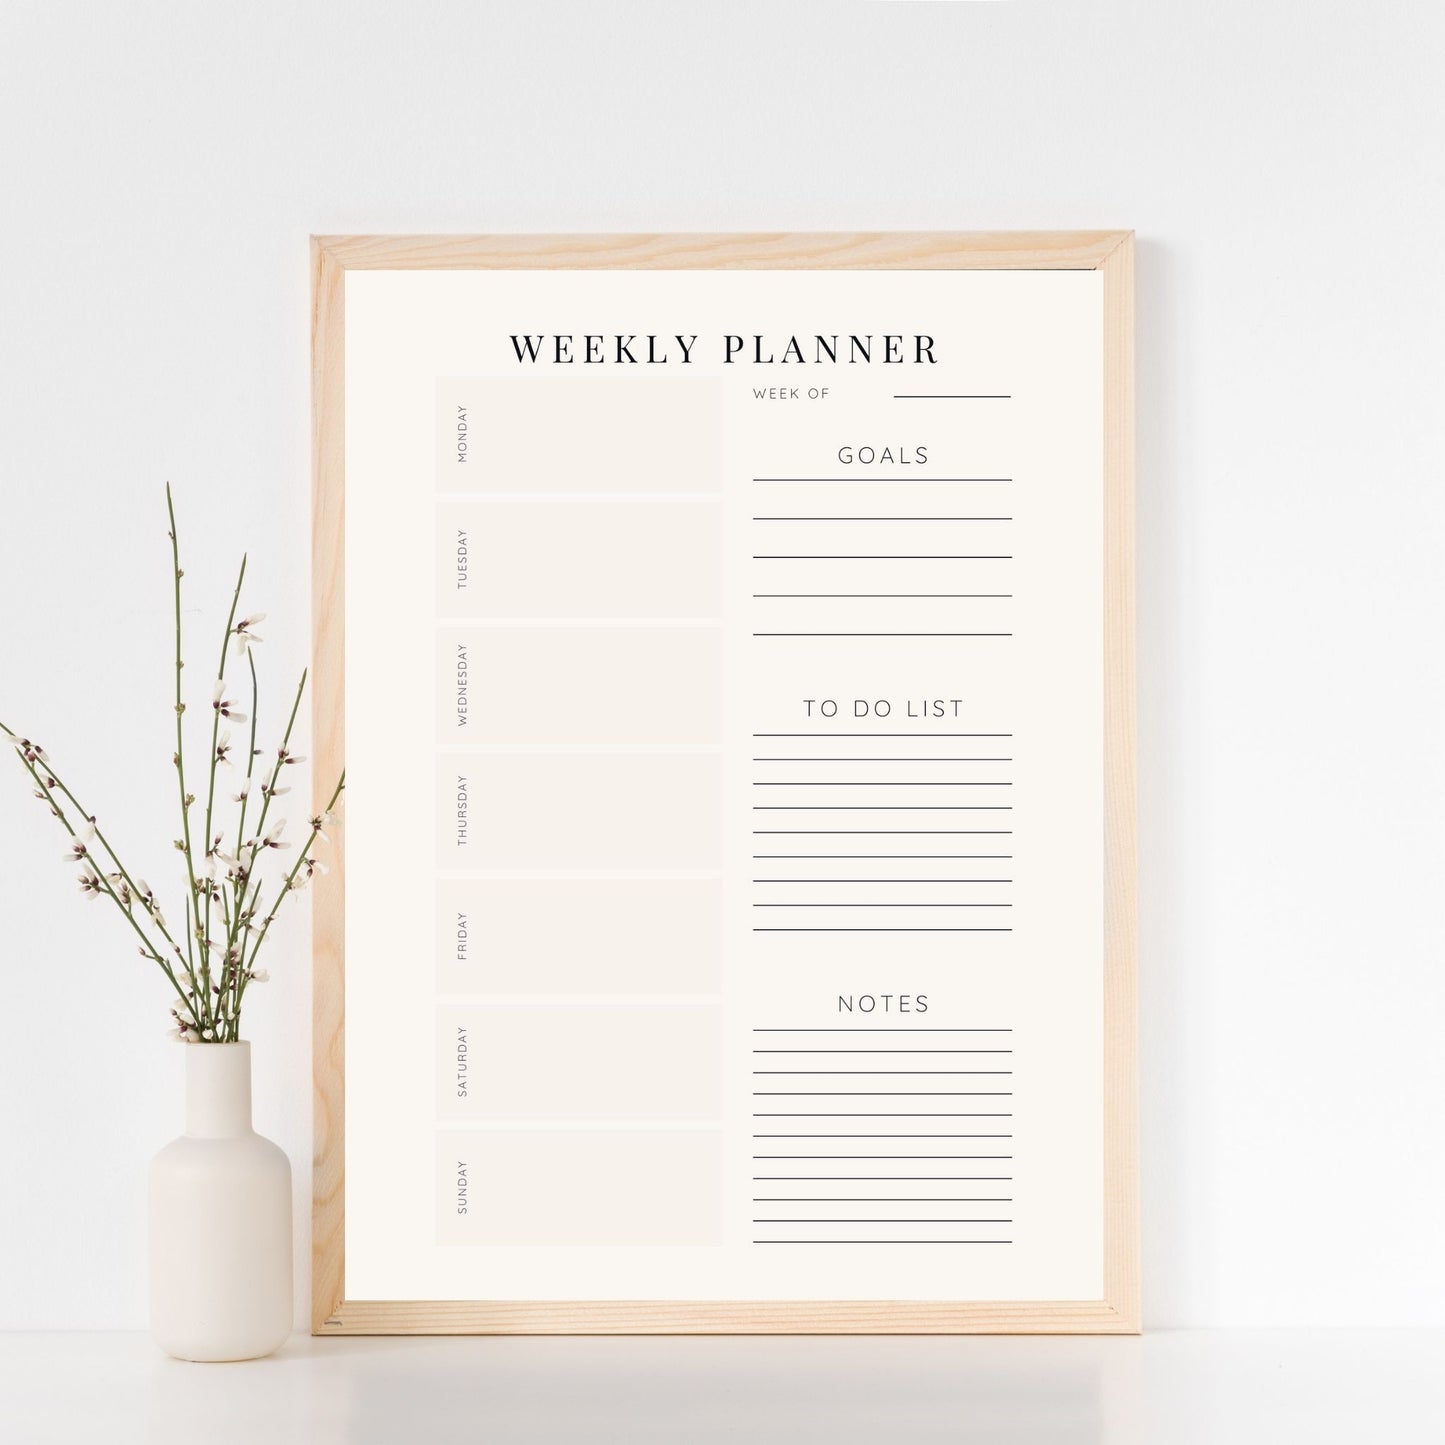 Weekly Family Planner Poster